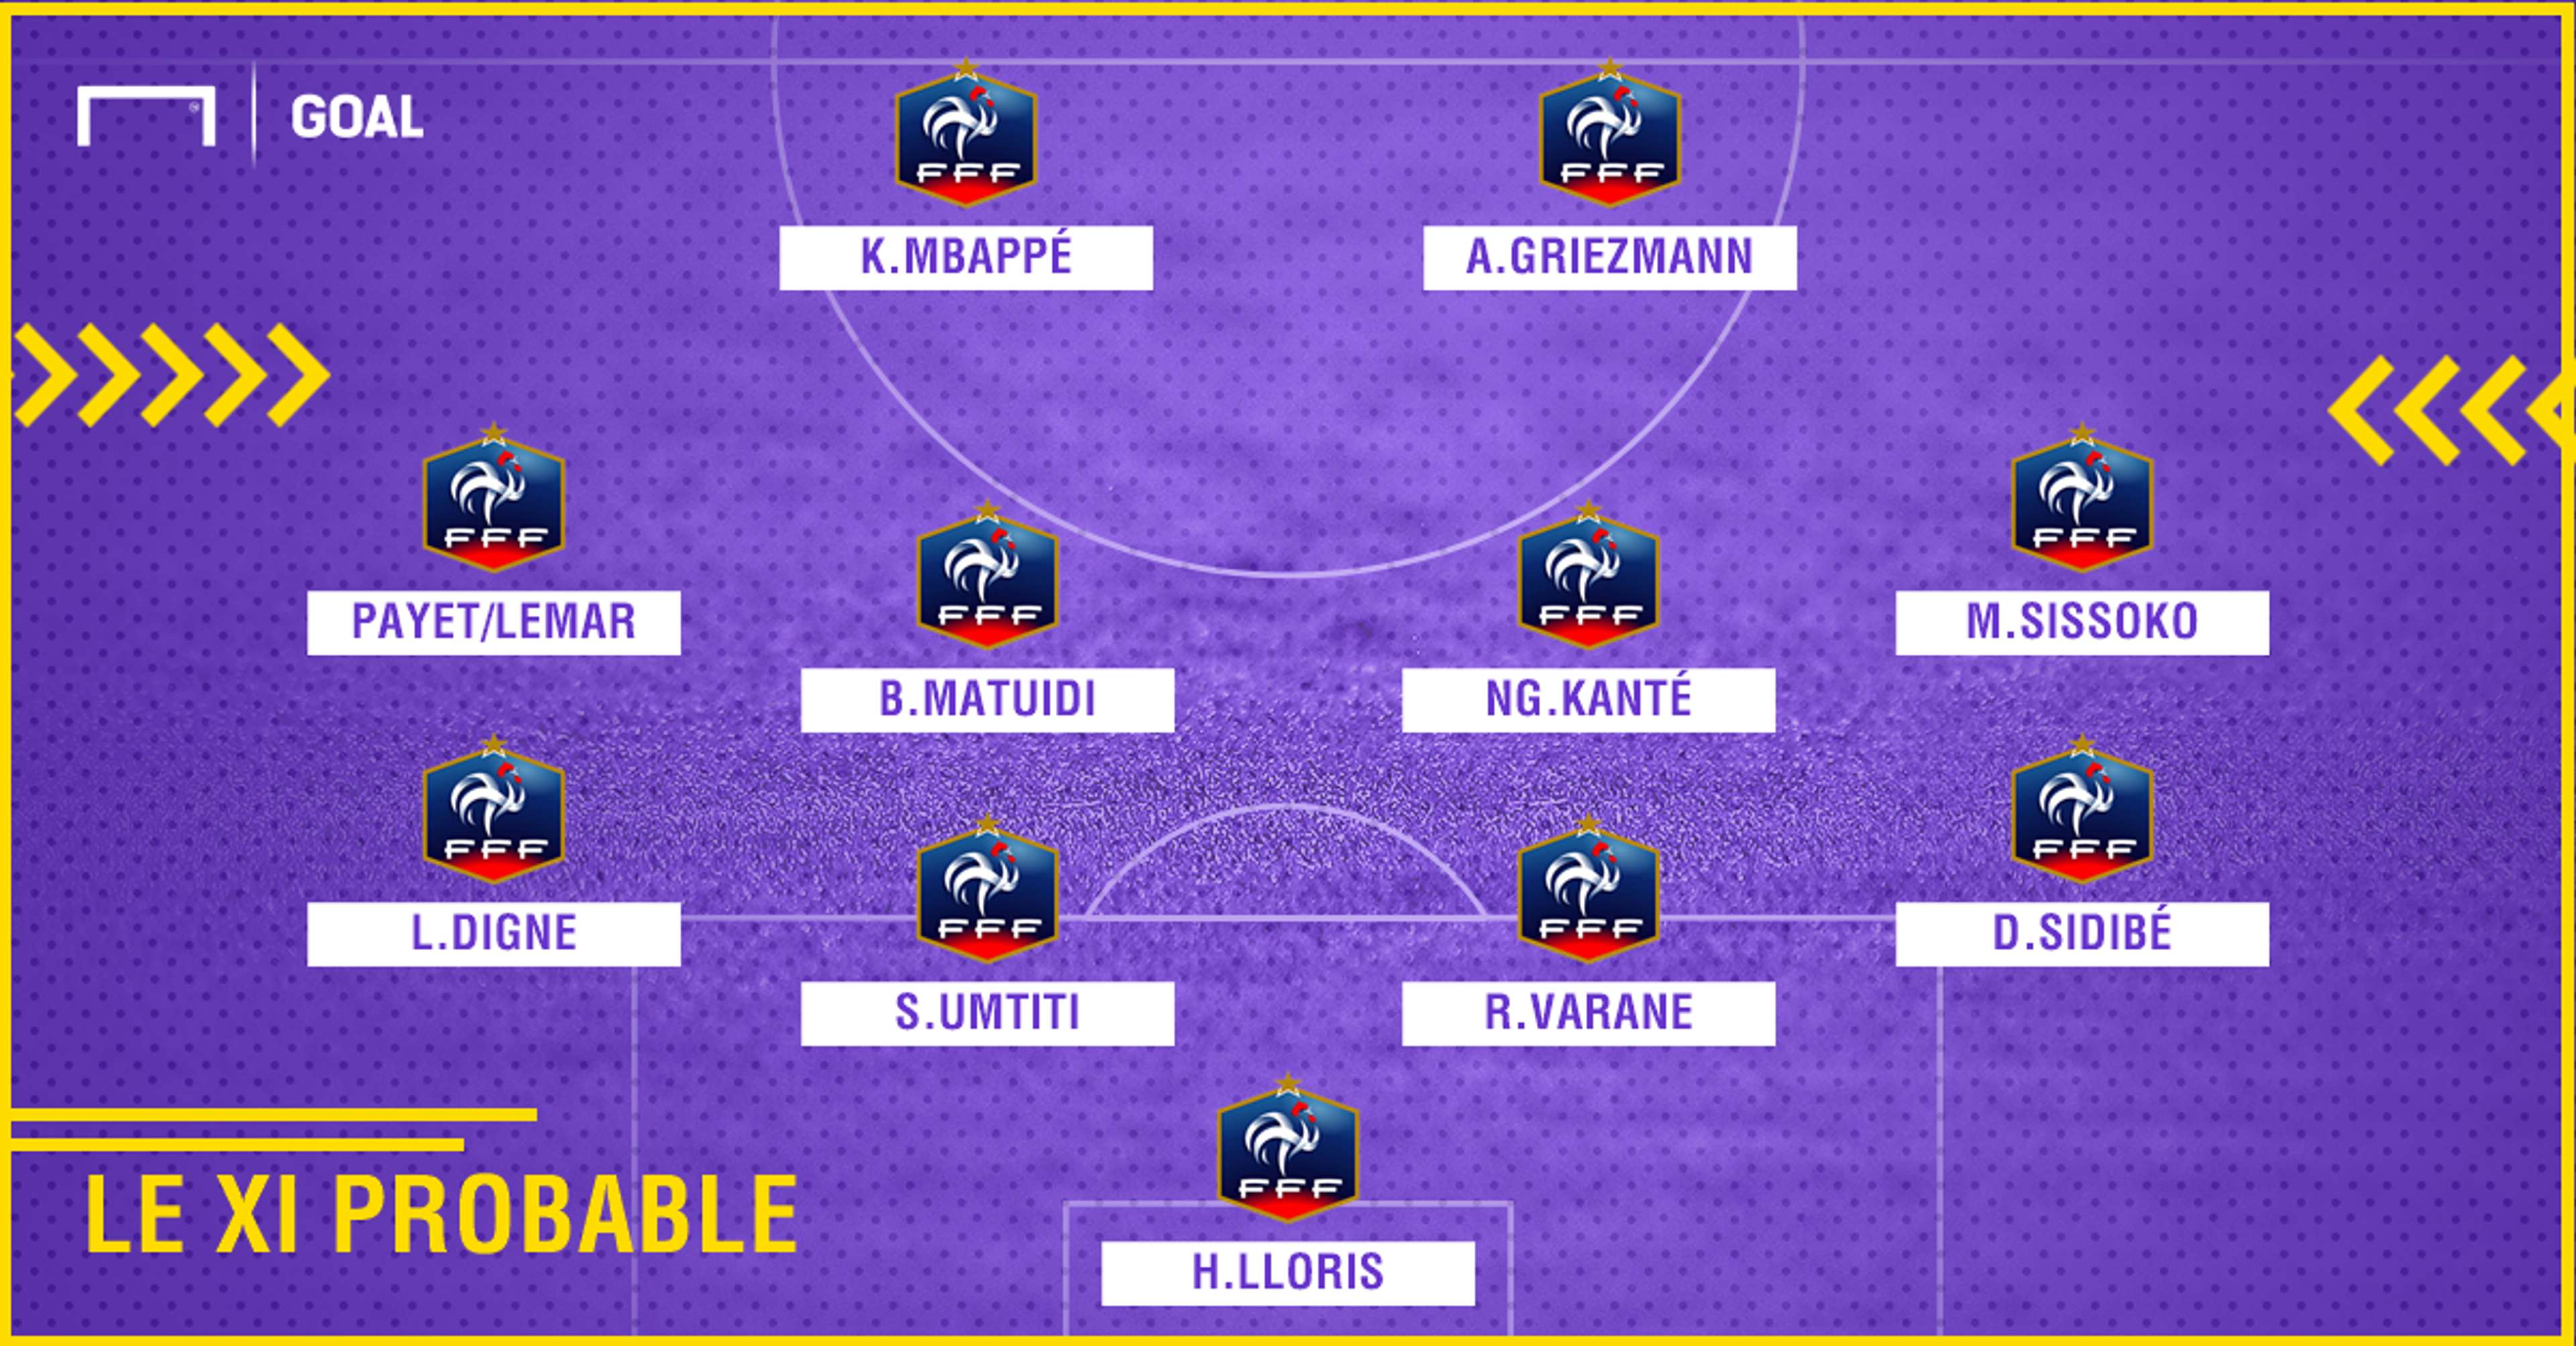 PS compo probable